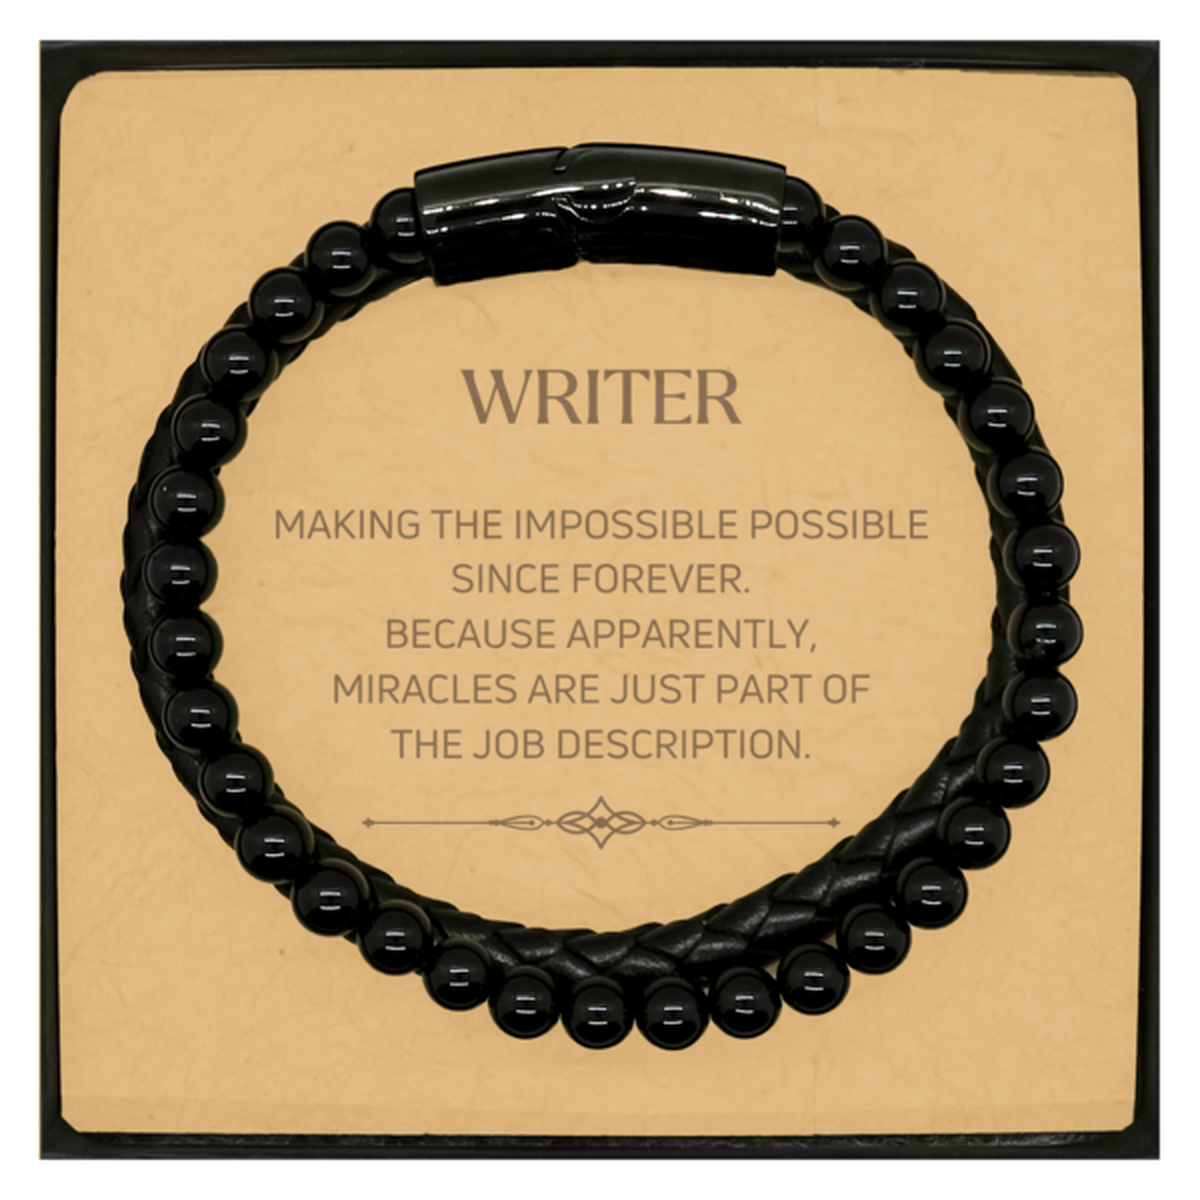 Funny Writer Gifts, Miracles are just part of the job description, Inspirational Birthday Christmas Stone Leather Bracelets For Writer, Men, Women, Coworkers, Friends, Boss